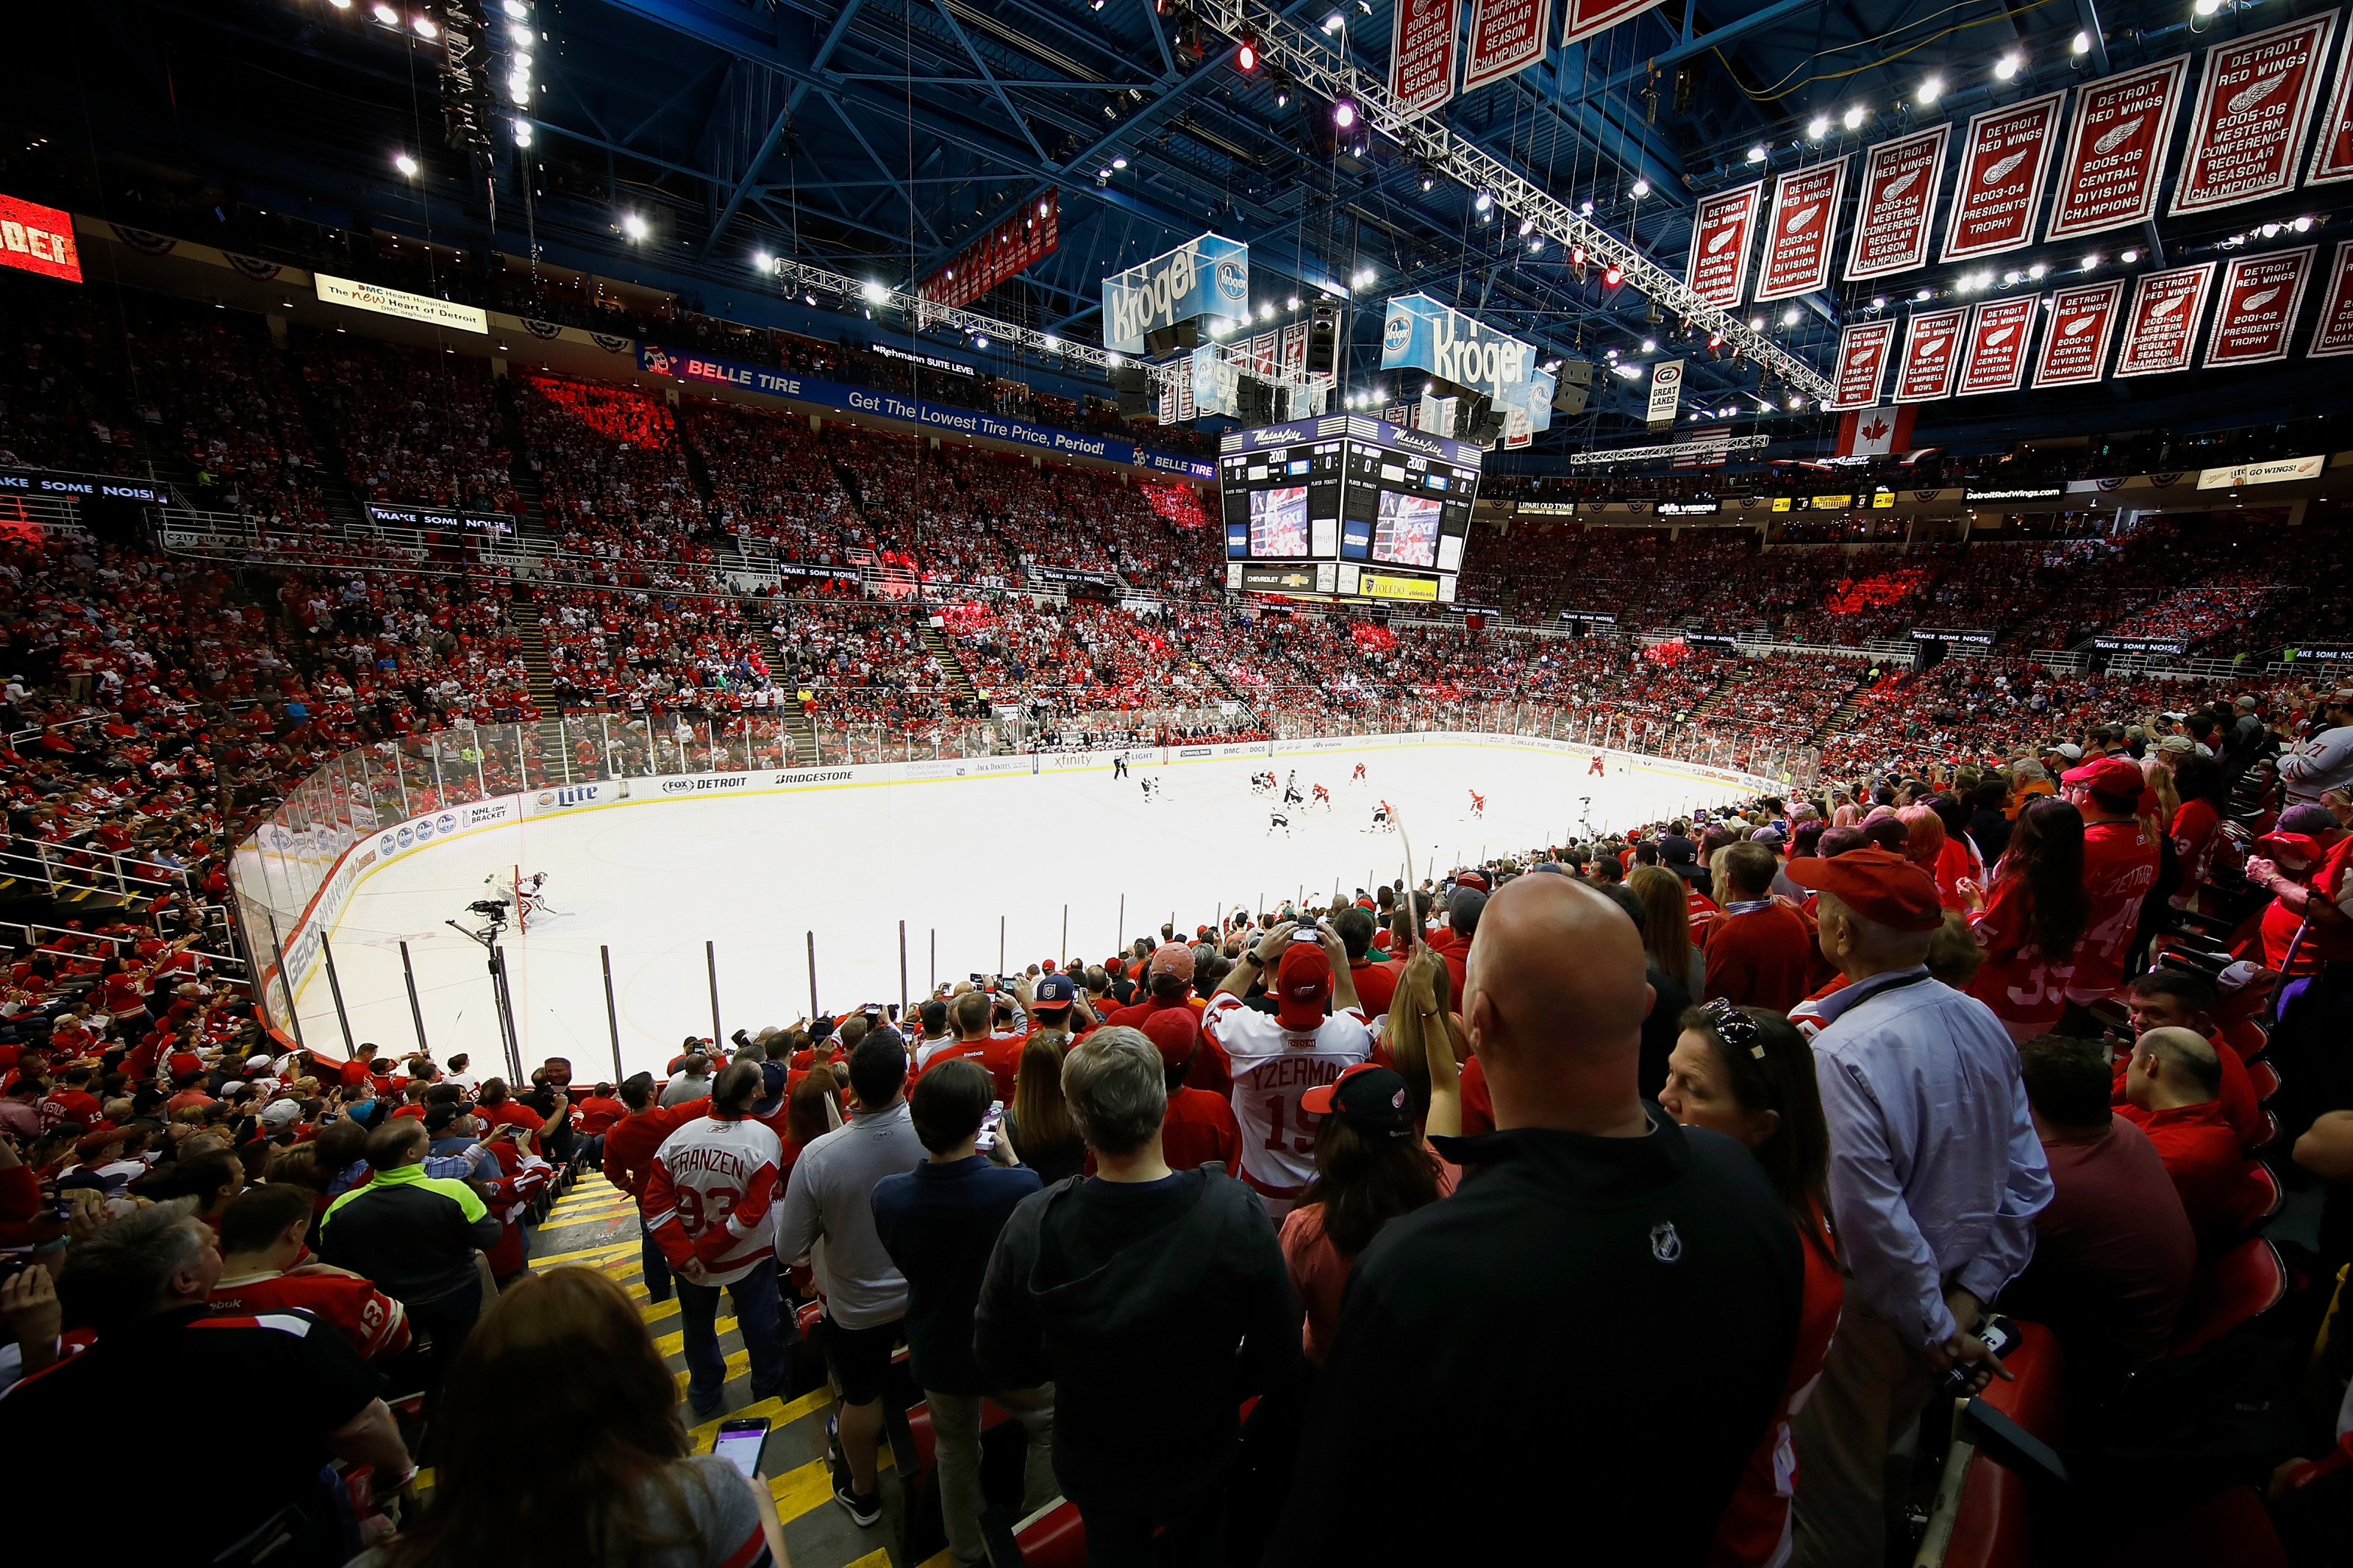 Tiny Red Wings fan wins over Joe Louis Arena crowd